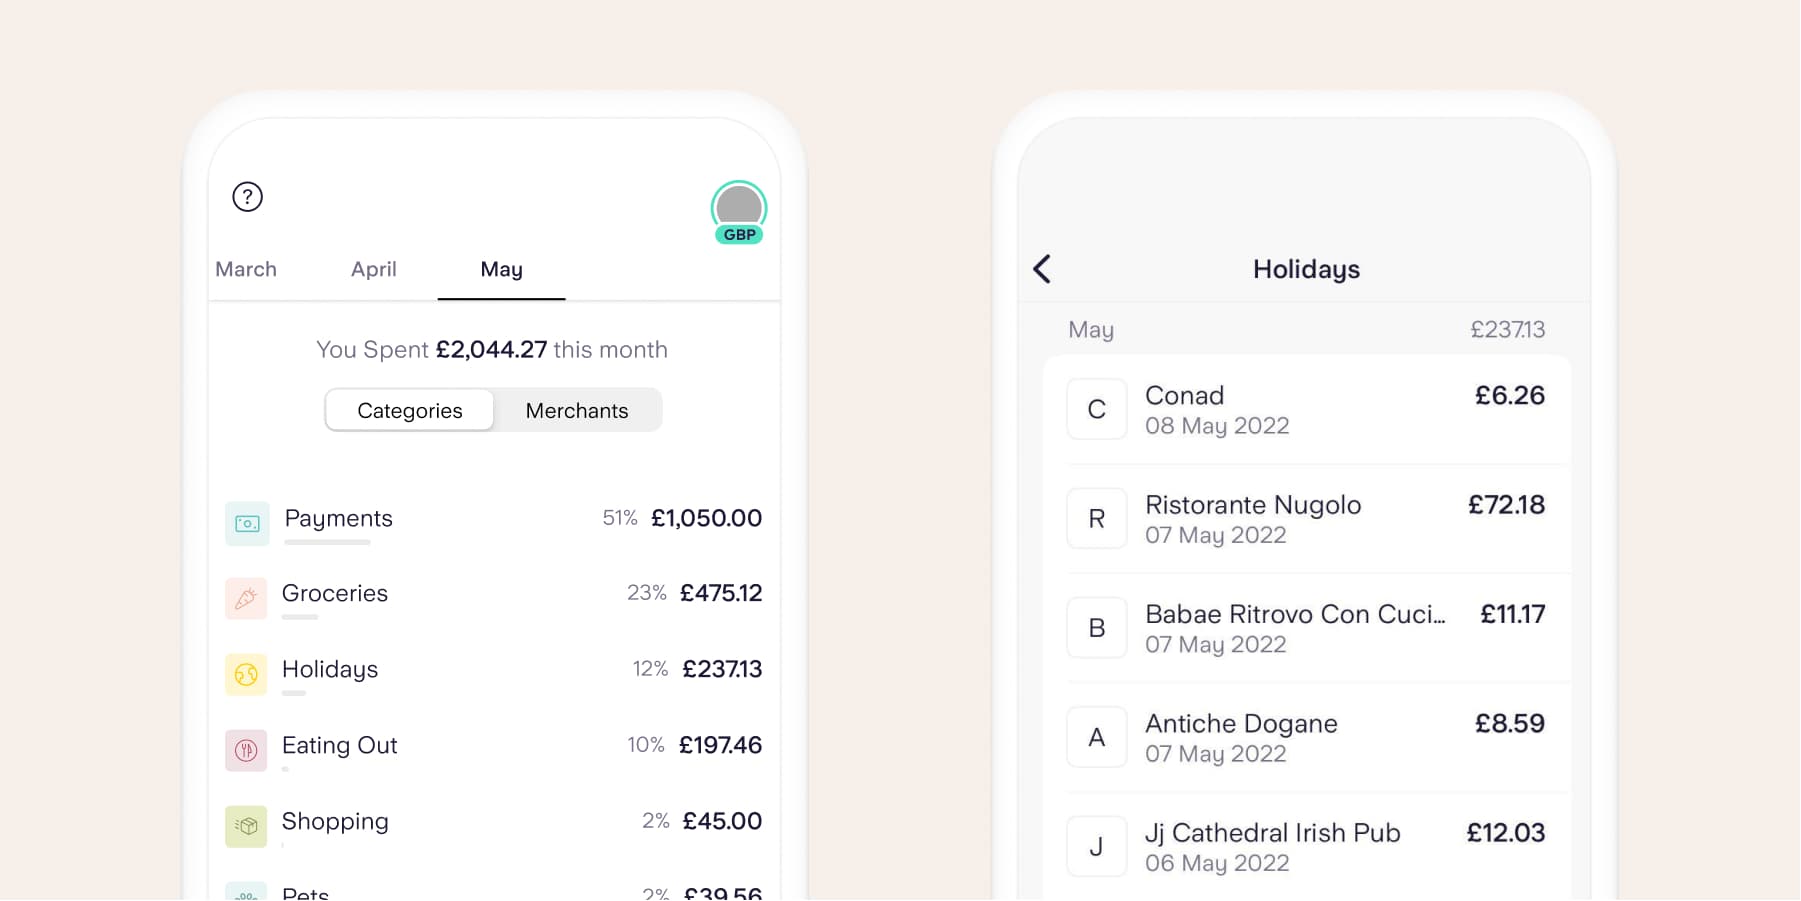 List of transactions within the Starling app